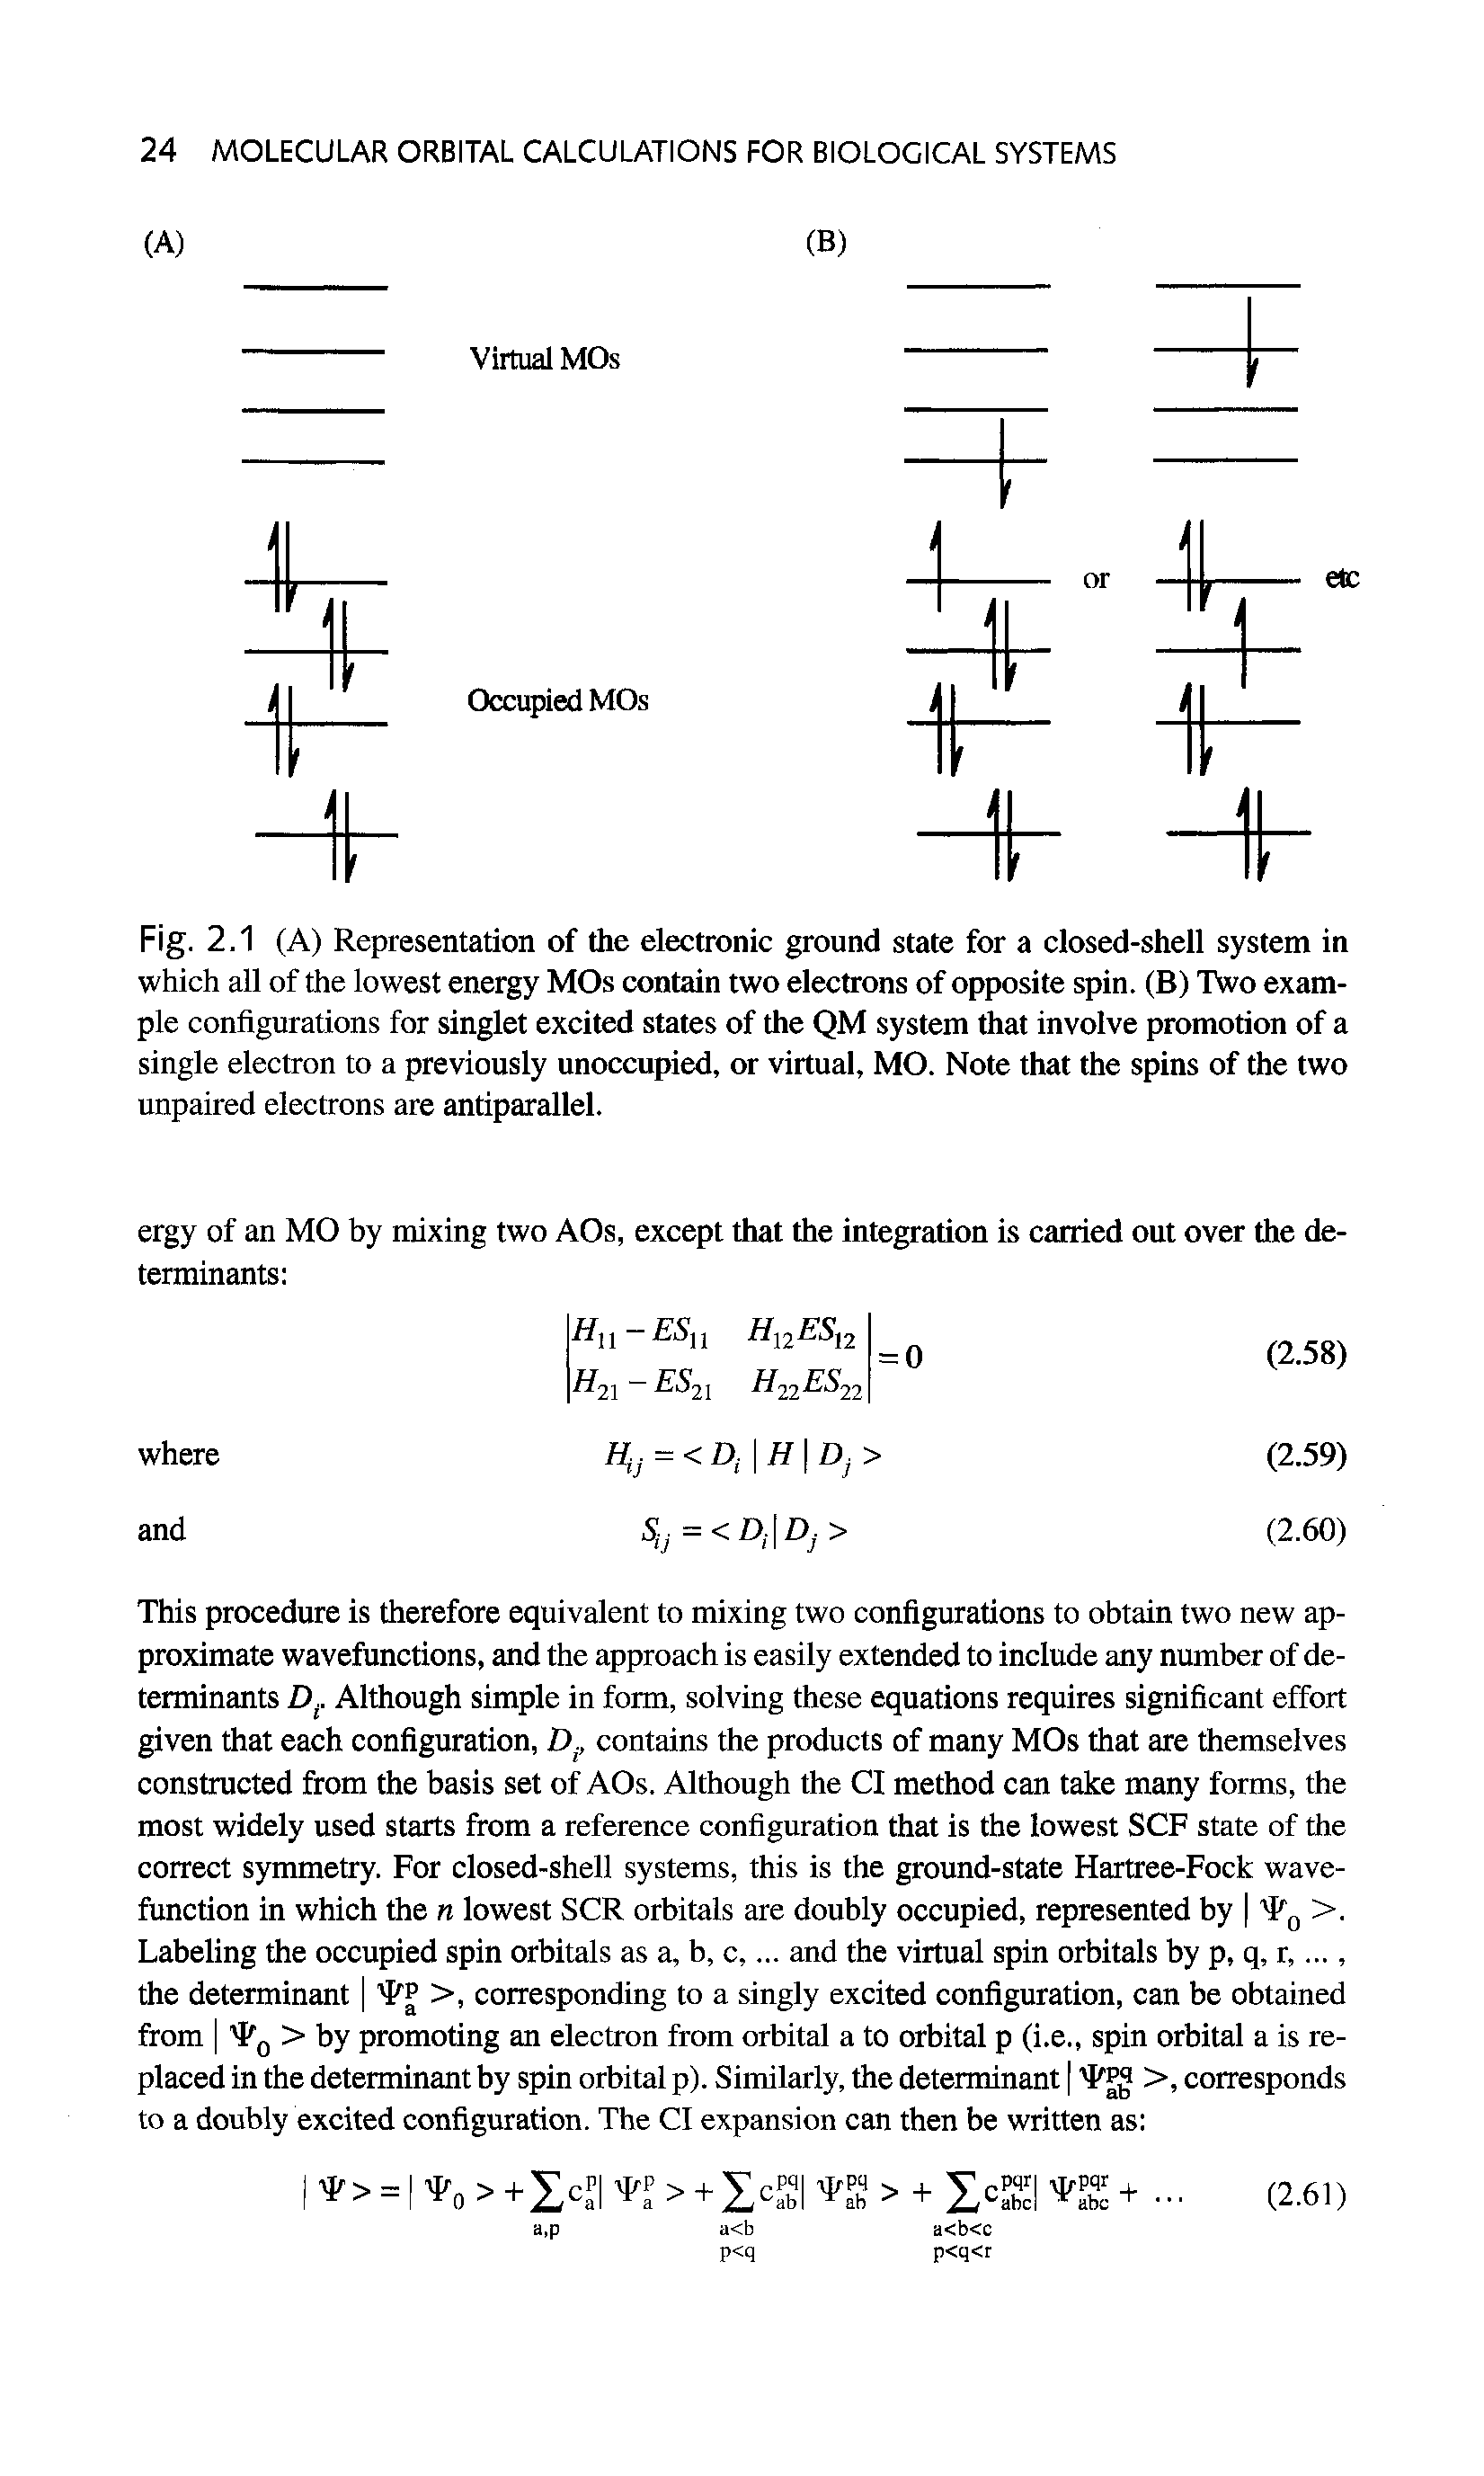 Fig. 2.1 (A) Representation of the electronic ground state for a closed-shell system in which all of the lowest energy MOs contain two electrons of opposite spin. (B) Two example configurations for singlet excited states of the QM system that involve promotion of a single electron to a previously unoccupied, or virtual, MO. Note that the spins of the two unpaired electrons are antiparallel.